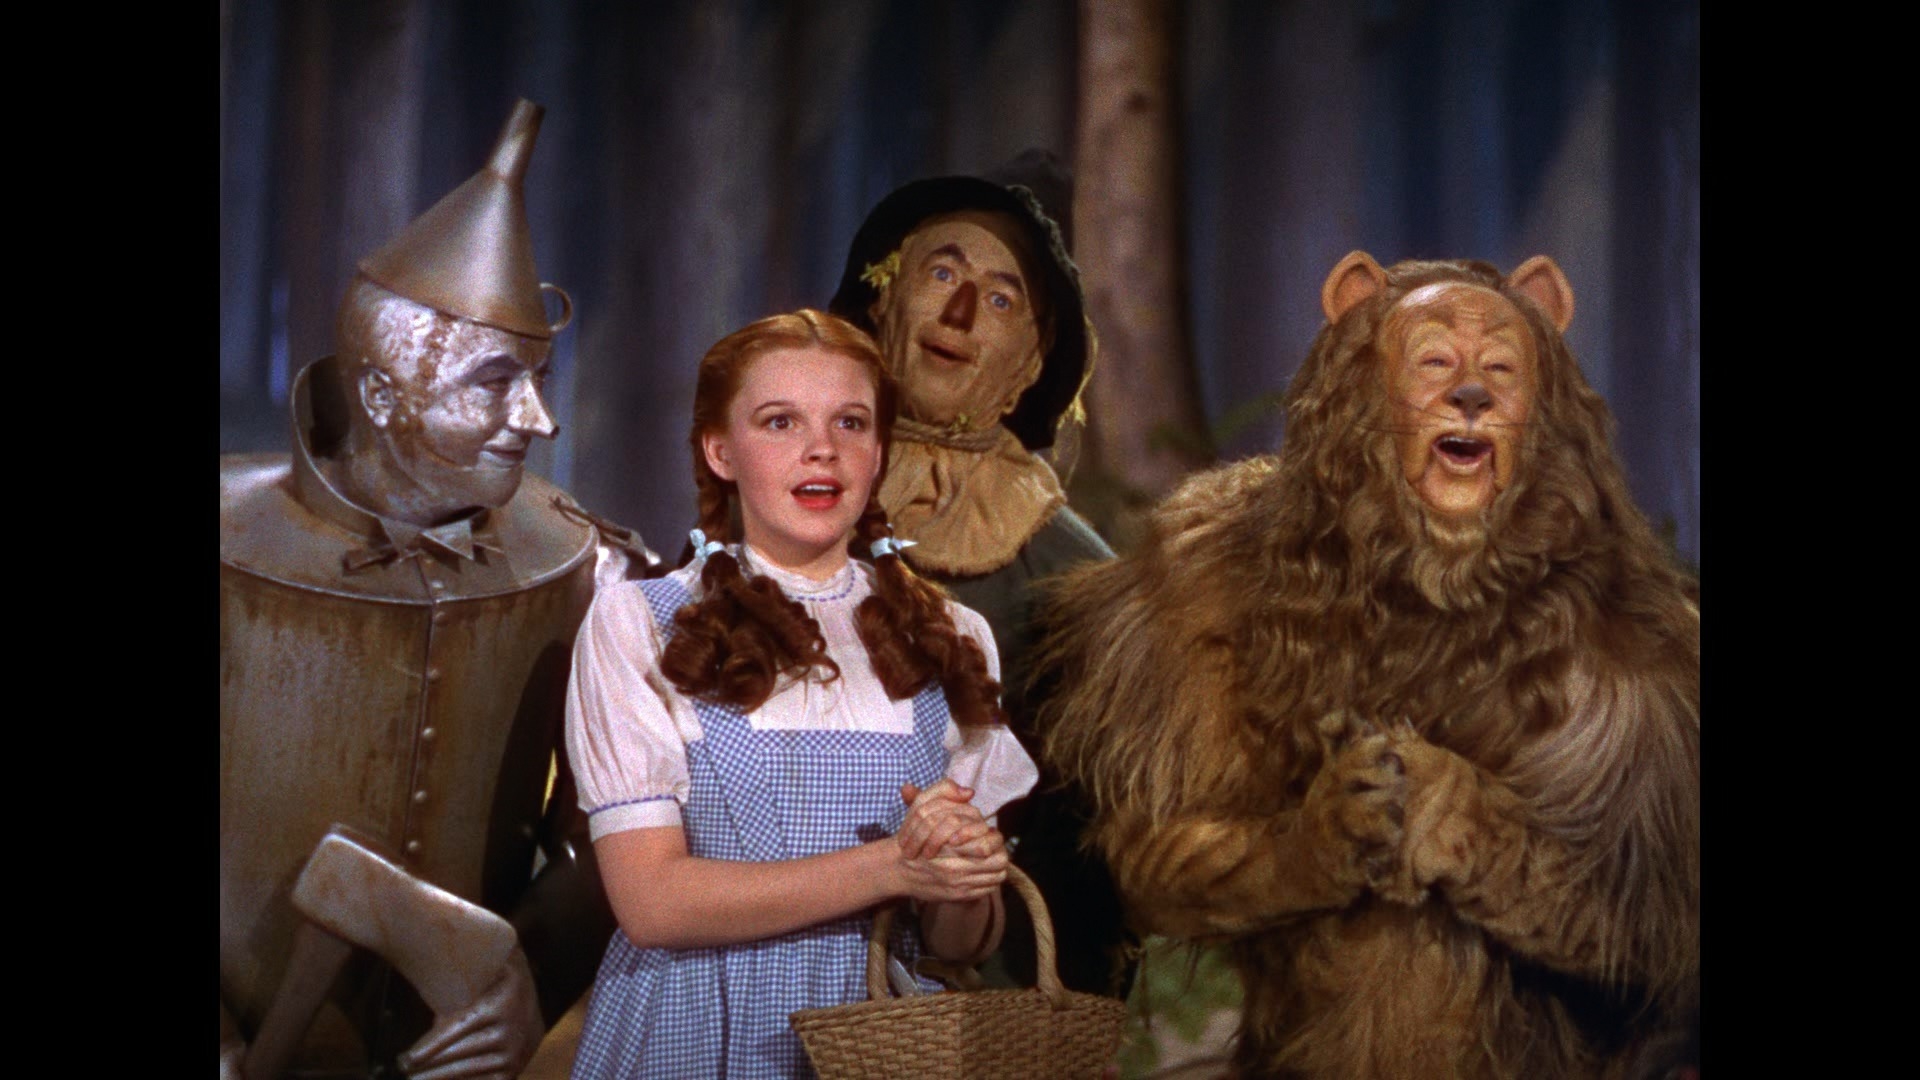 The Wizard Of Oz Wallpaper